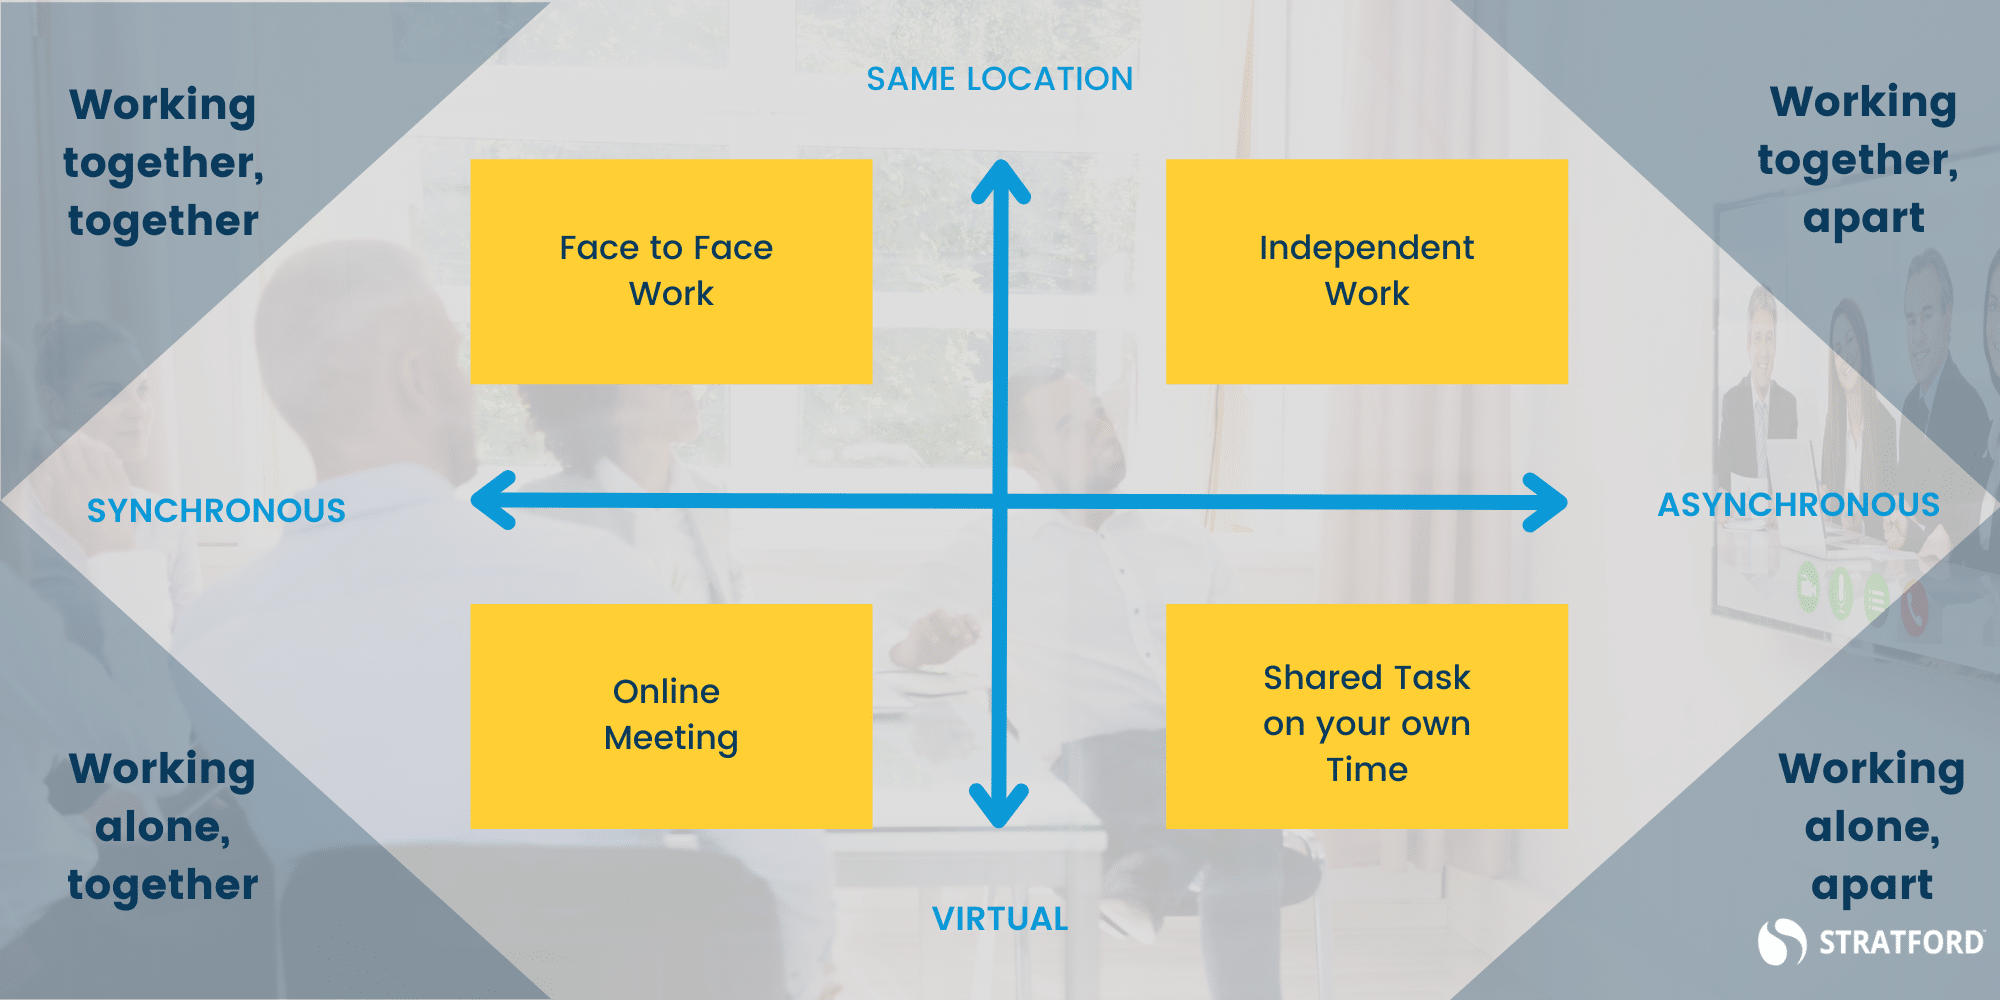 Chart showing the 4 quadrants created by hybrid work. Horizontal line L-R synchronous to asynchronous; vertical line T-B same location to virtual. 4 quadrants clockwise from top left are Face to Face Work, Independent Work, Shared Task on your own time, online meeting. 